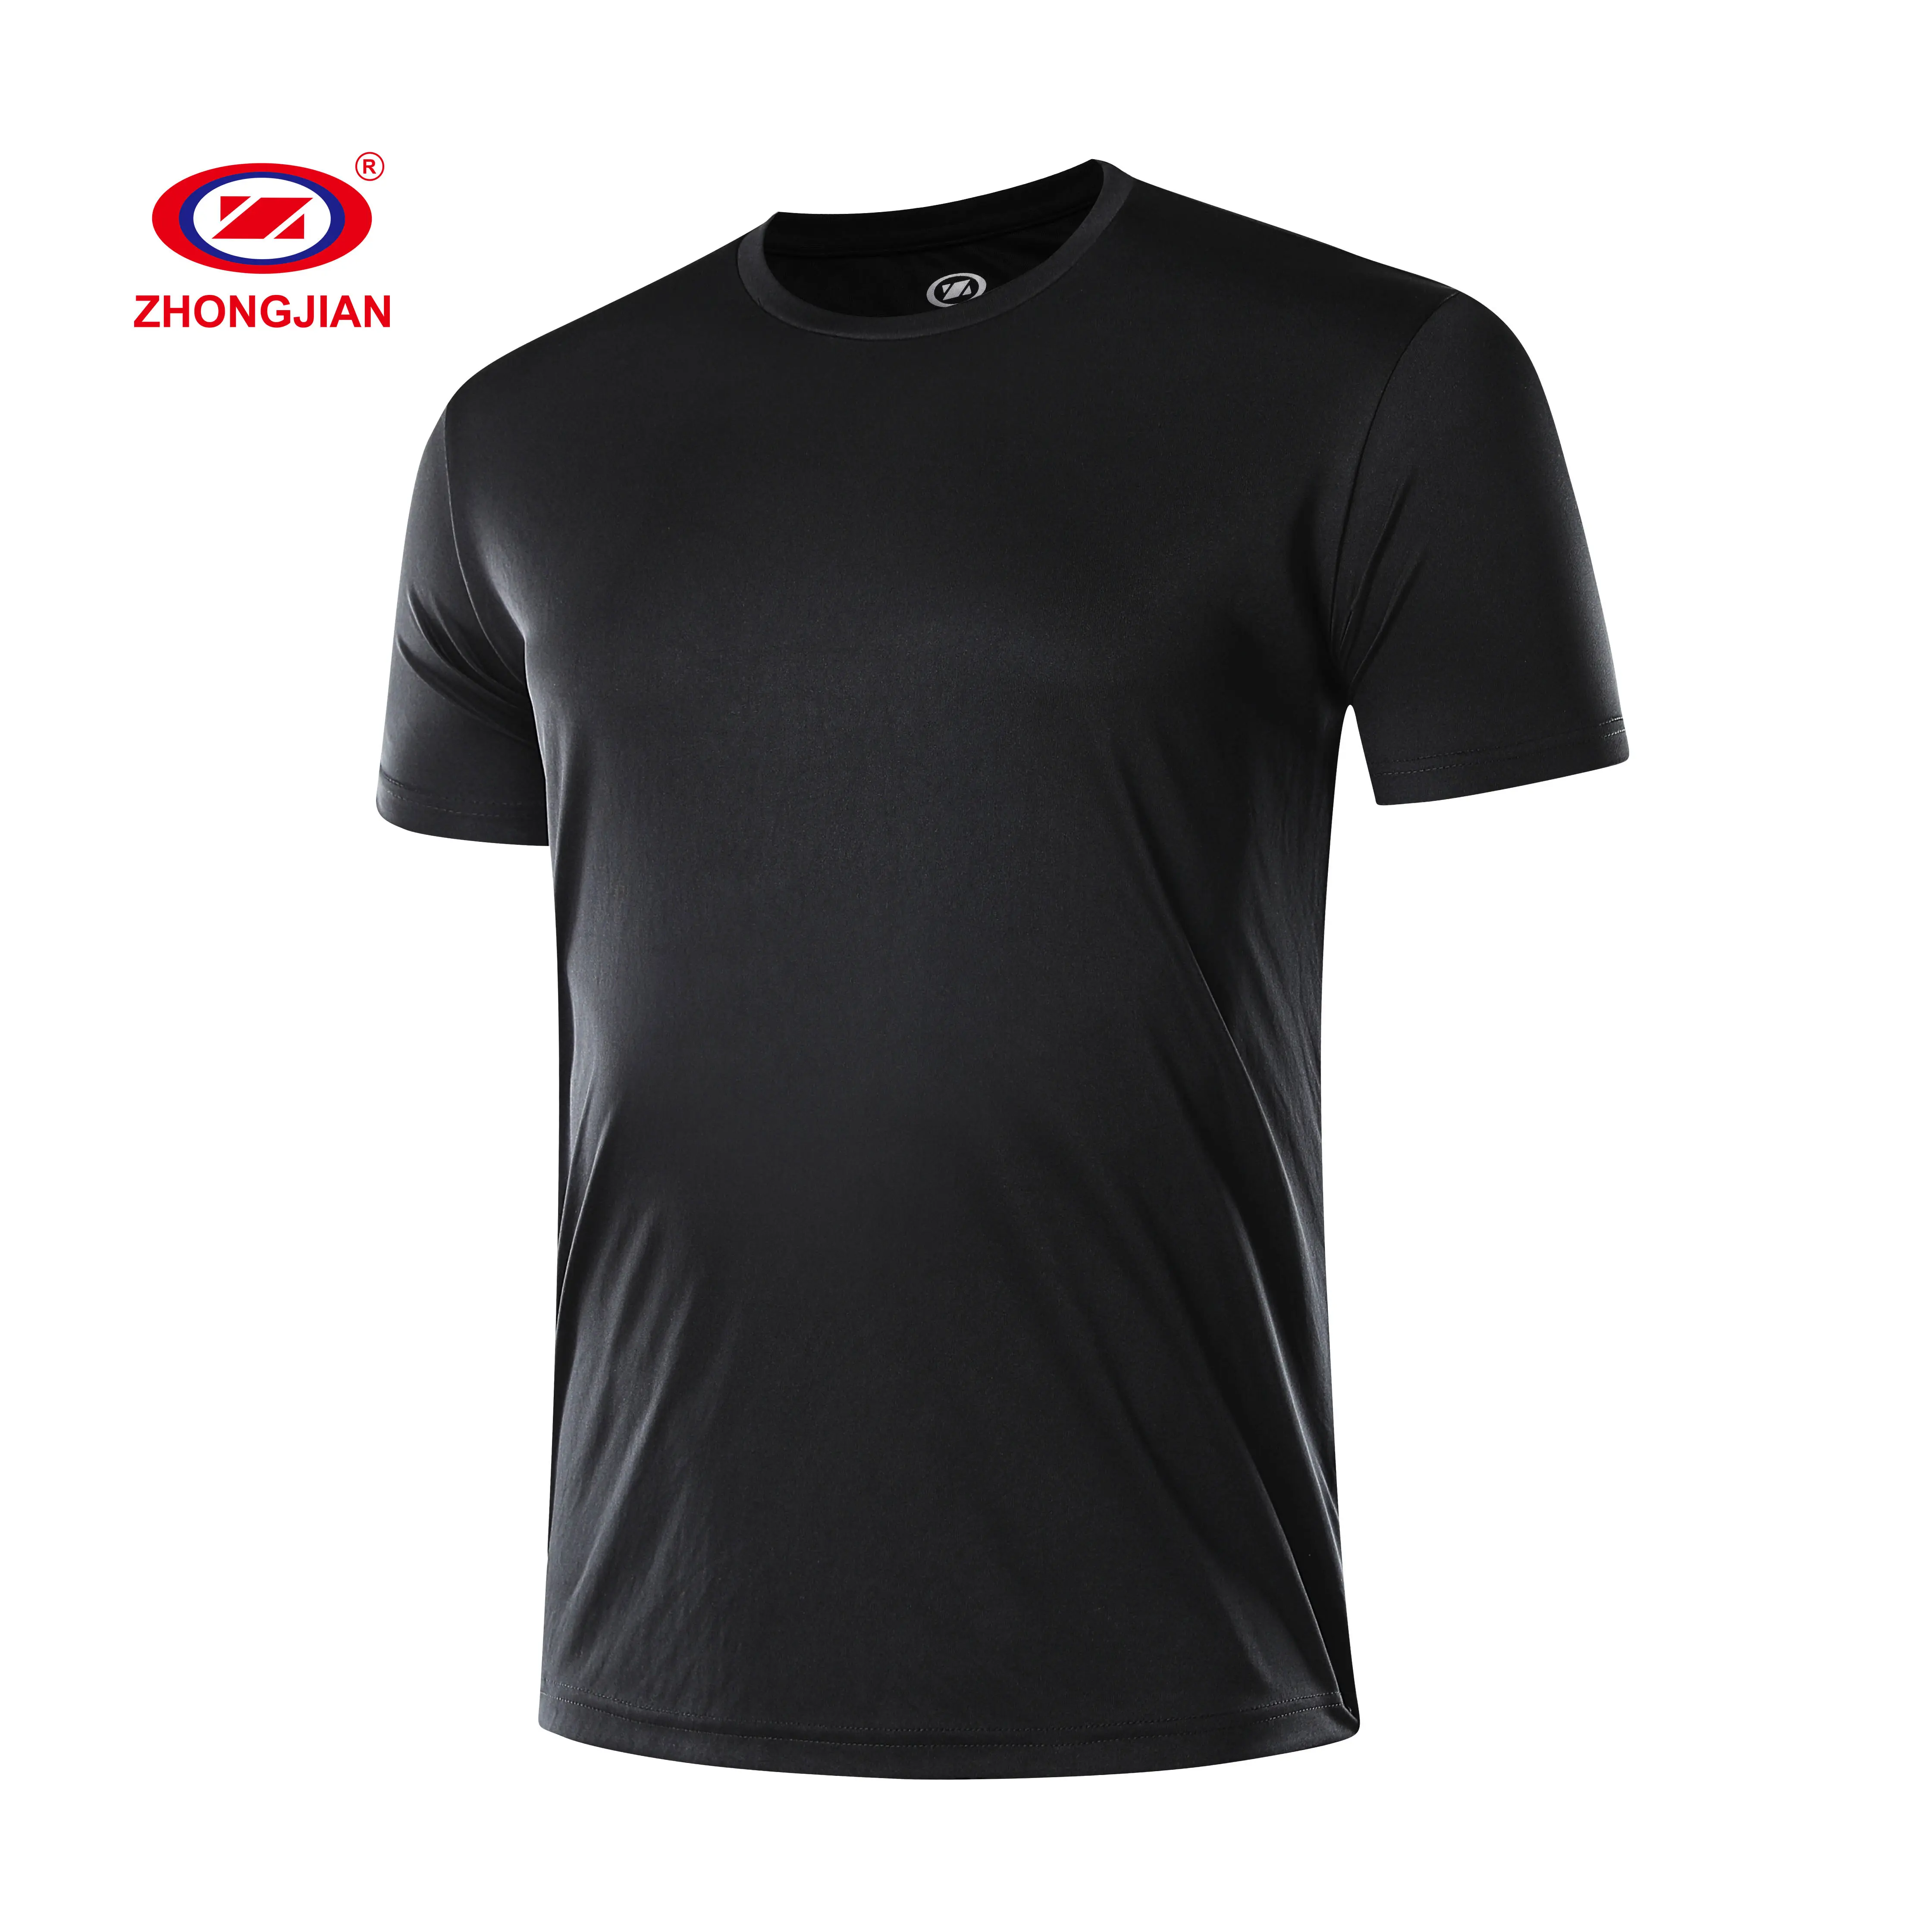 Cheap blank plain shirt gym wear sport clothes fitness compression tops casual man running tshirts